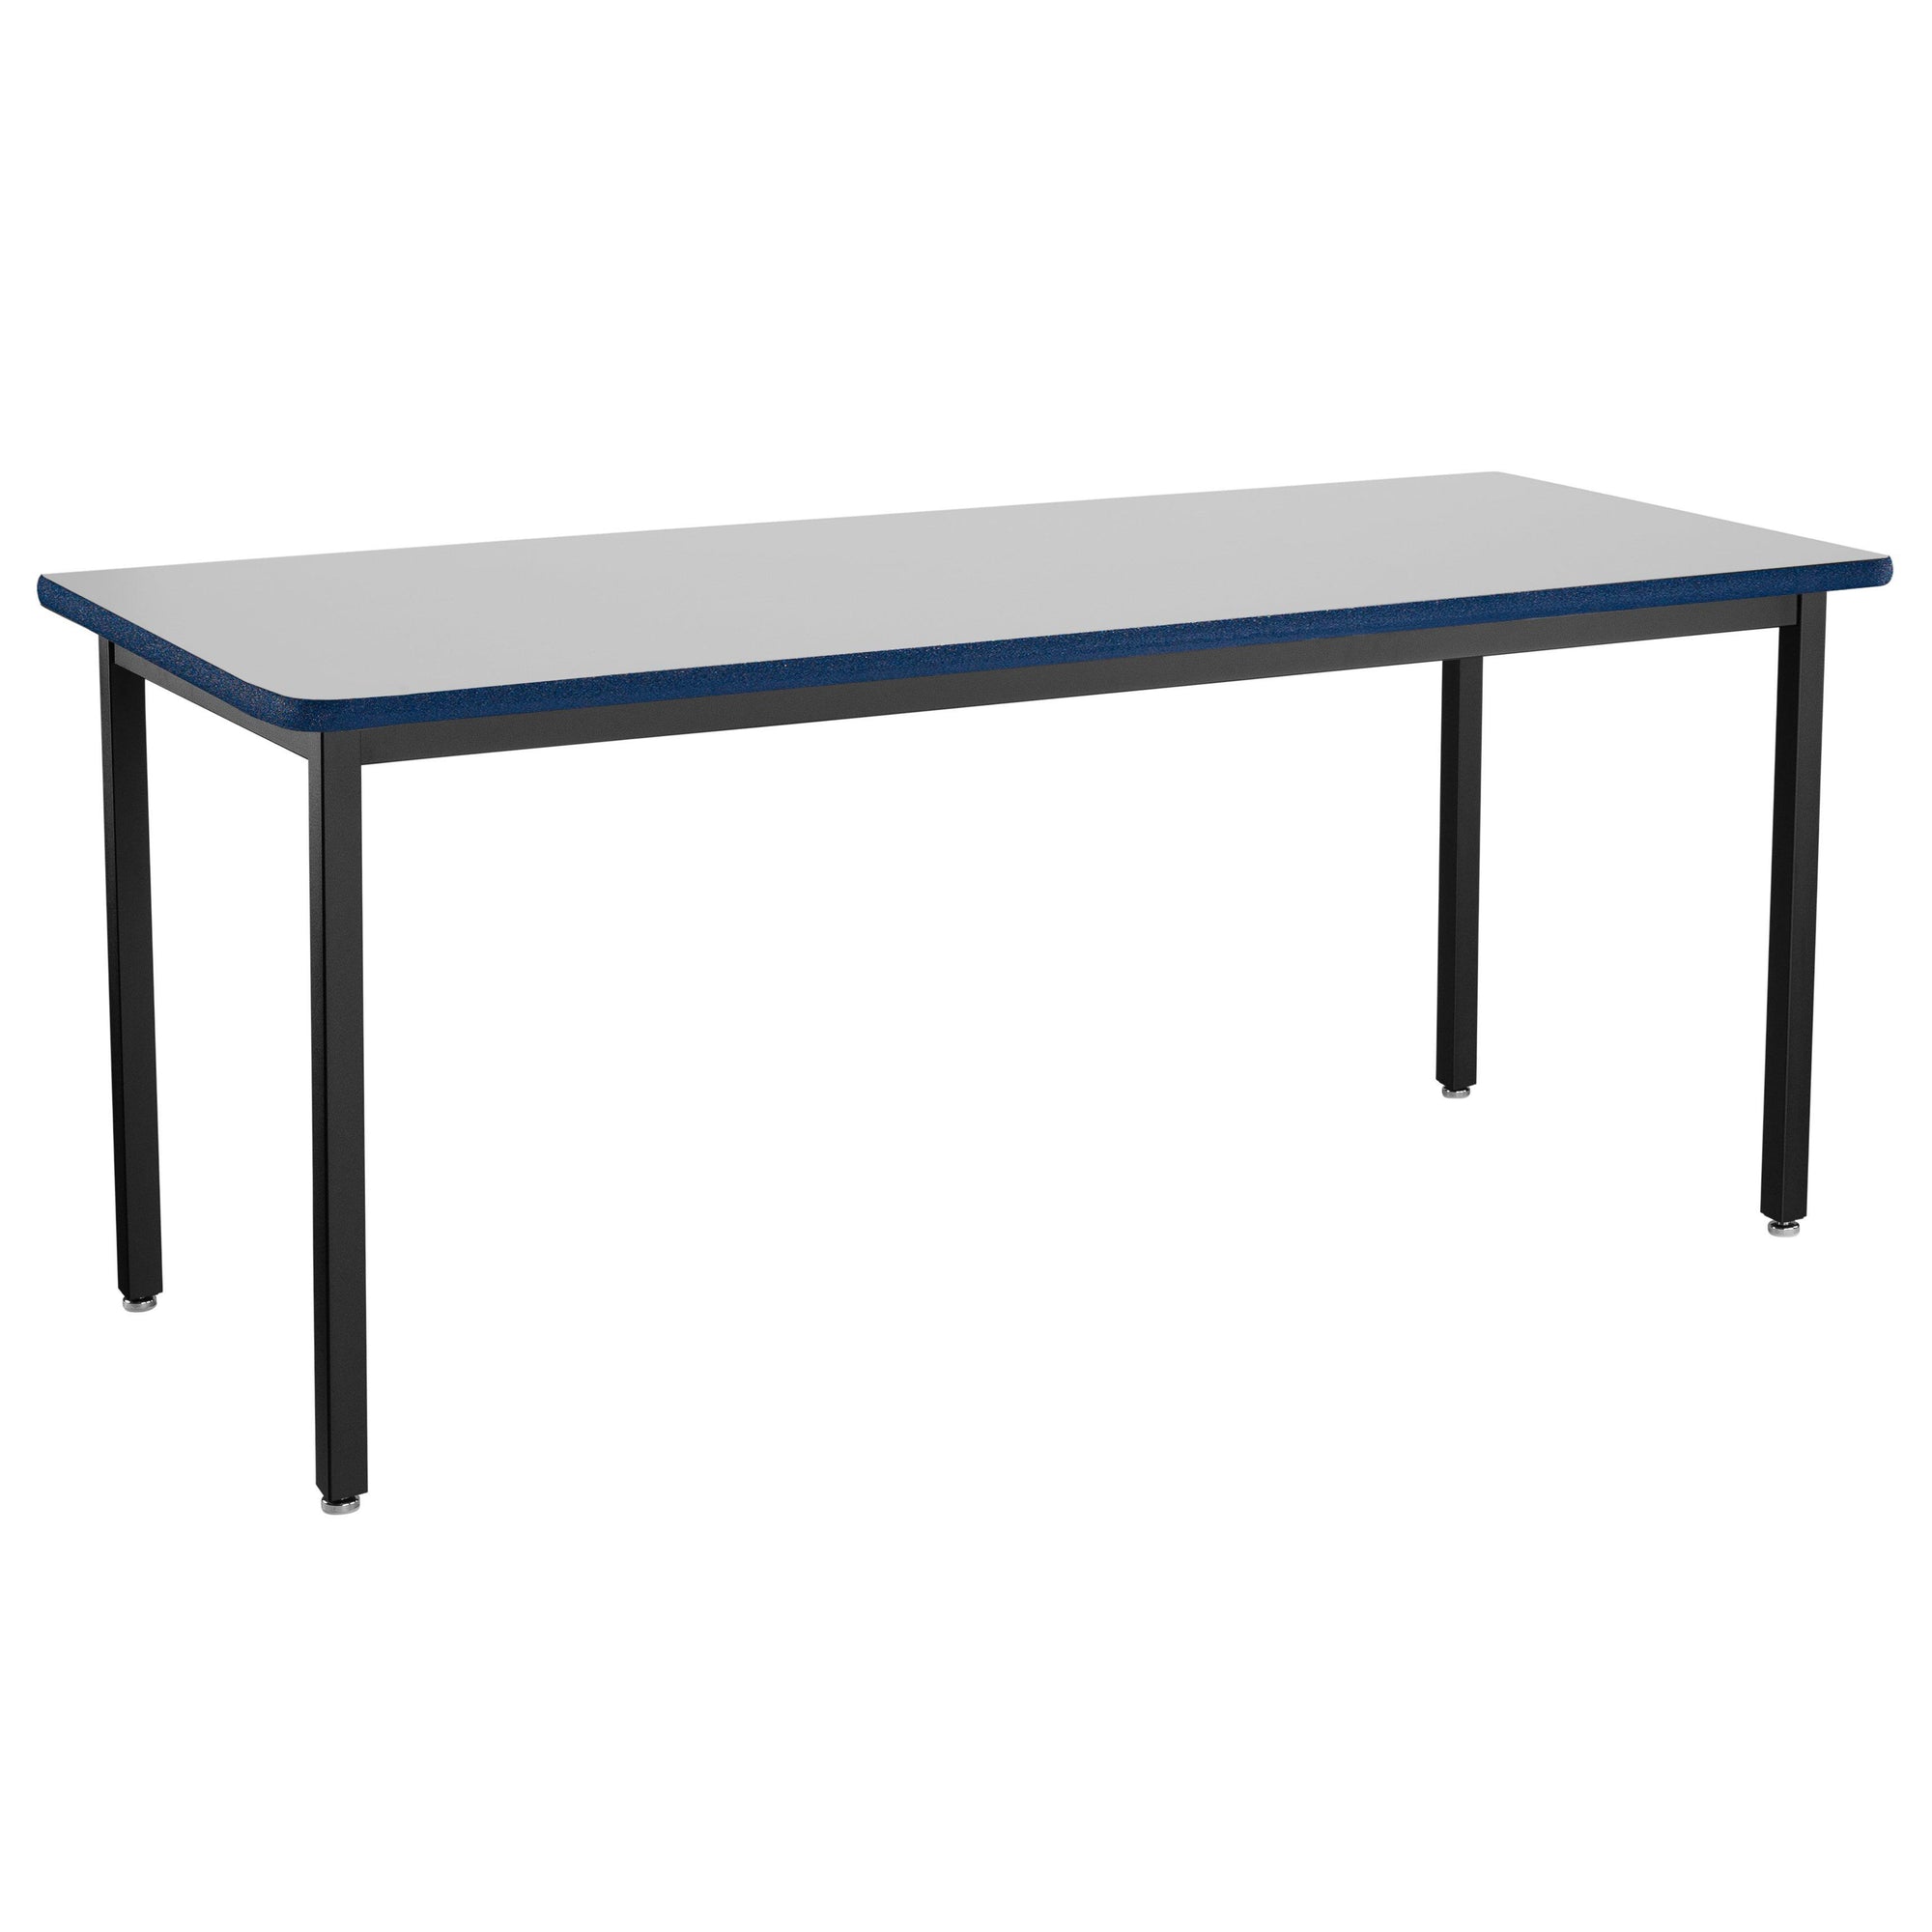 Heavy-Duty Fixed Height Utility Table, Black Frame, 30" x 72", Supreme High-Pressure Laminate Top with Black ProtectEdge